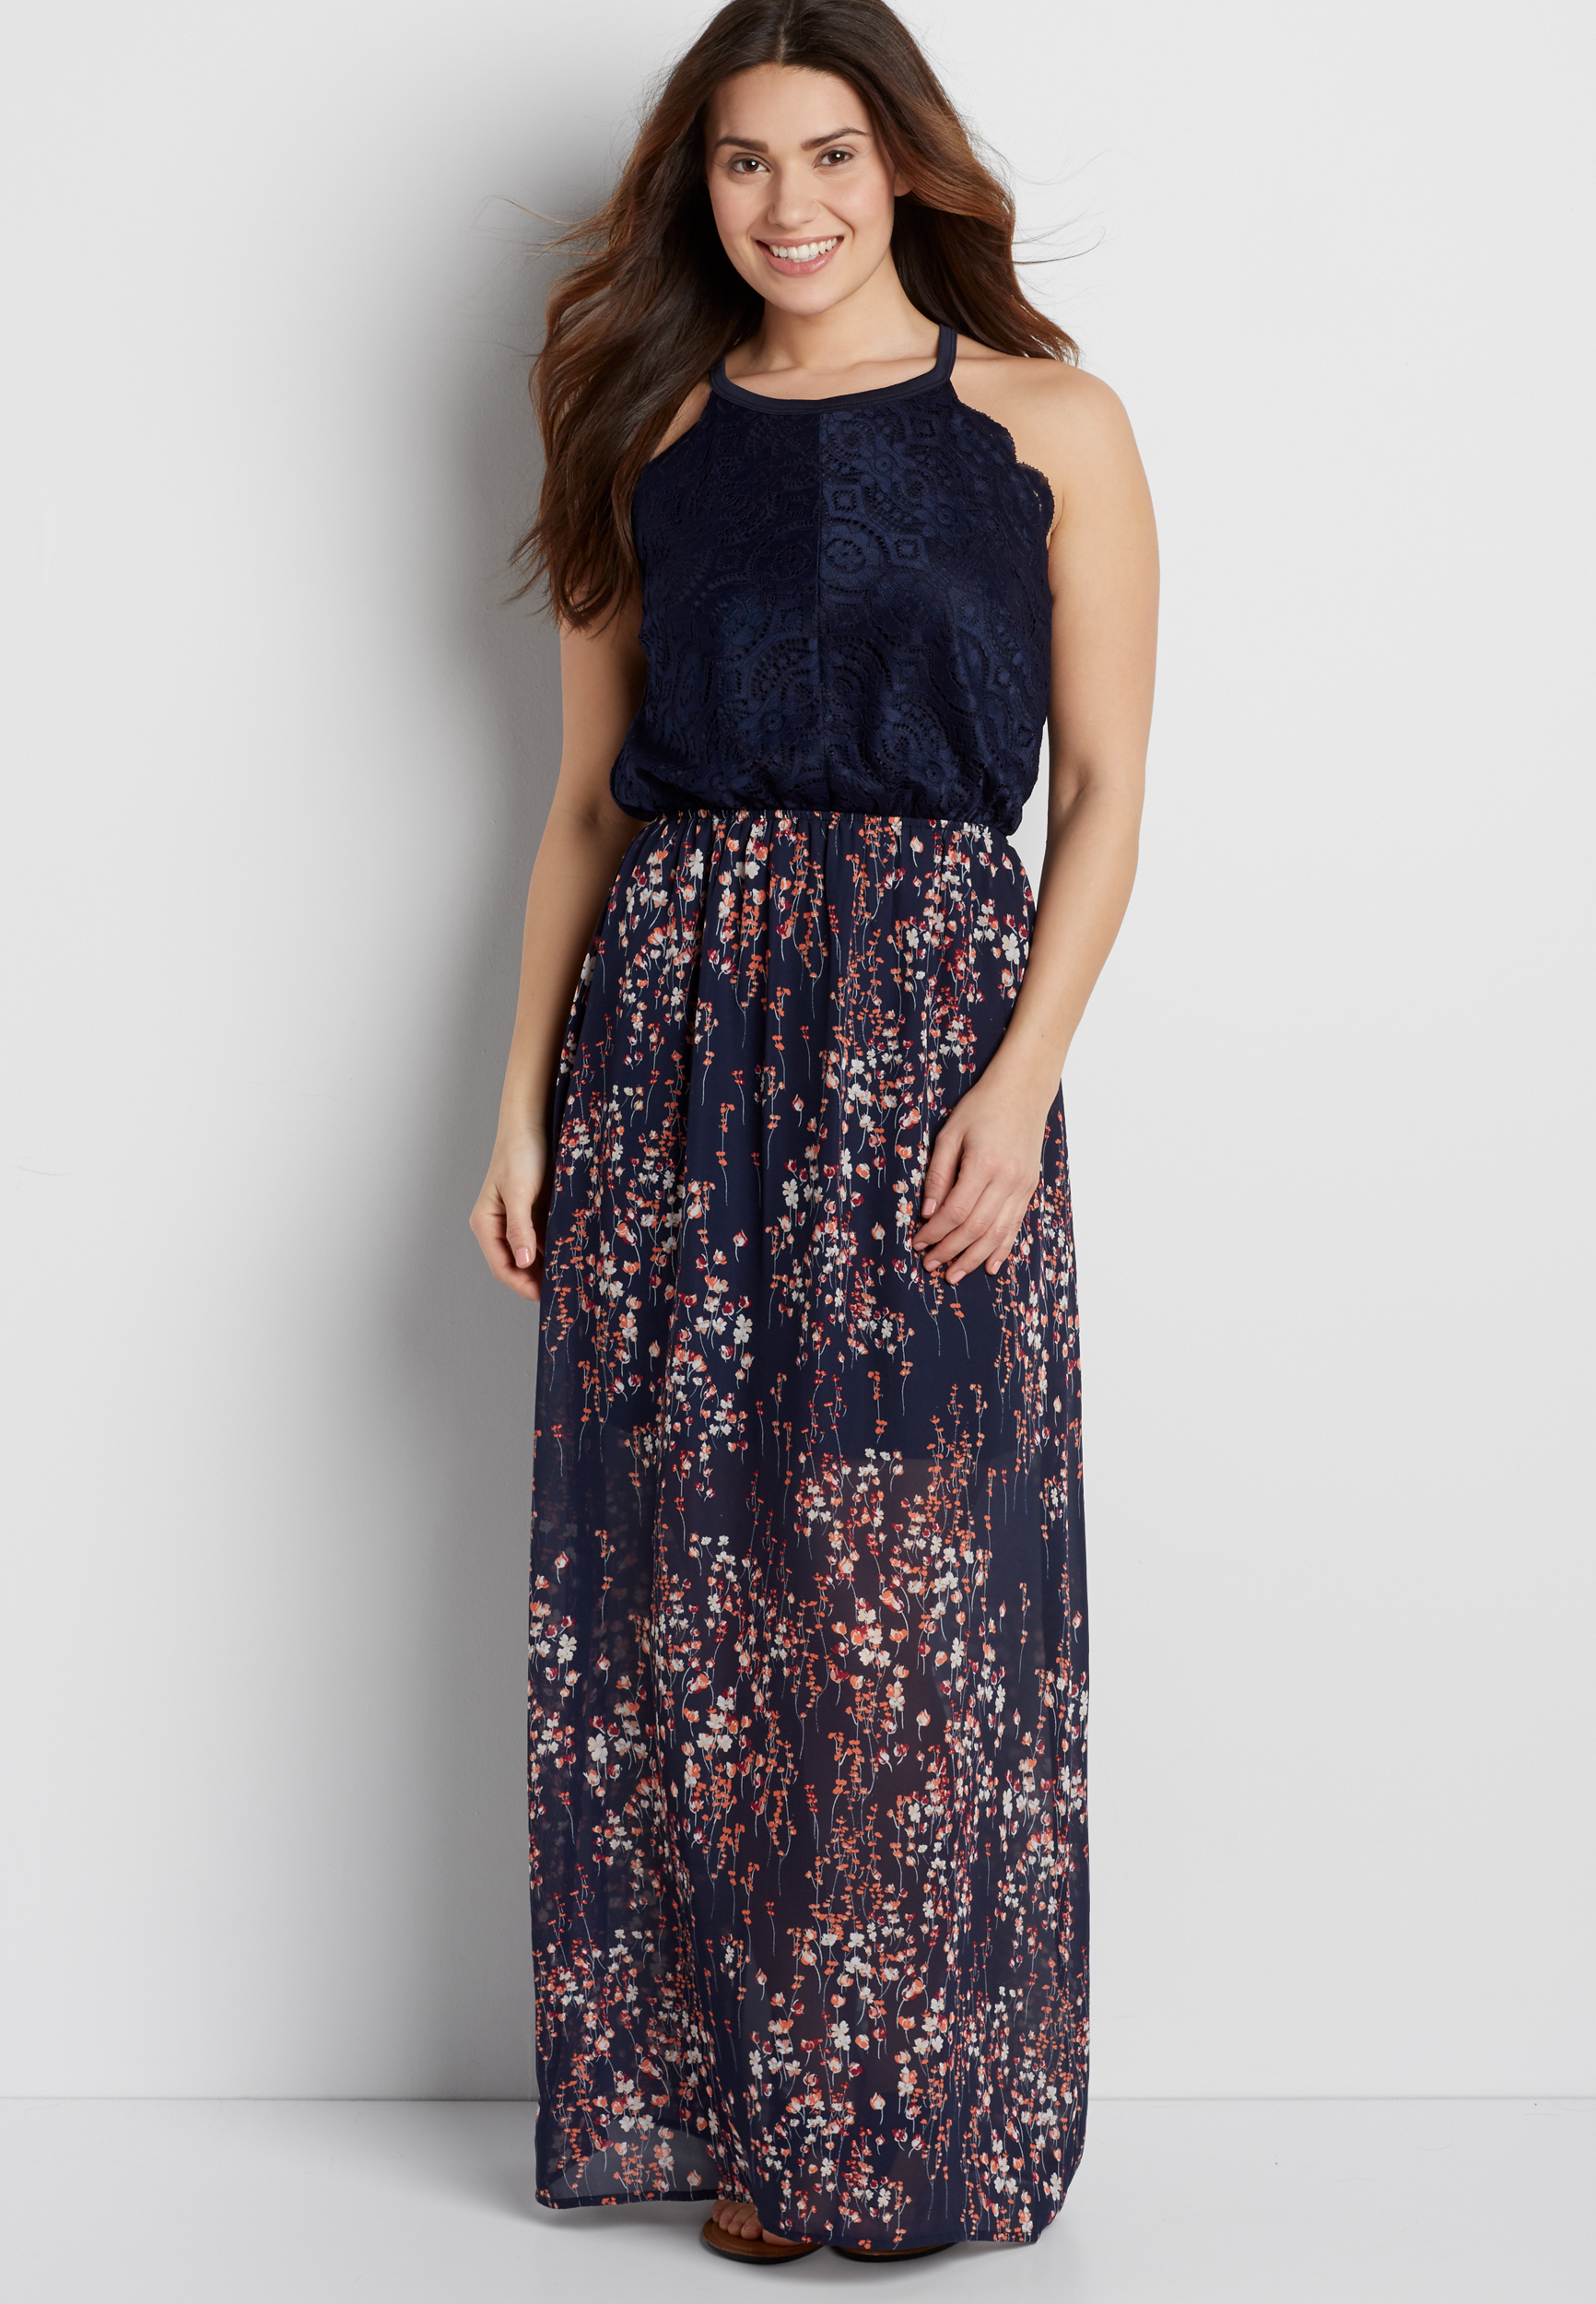 floral print maxi dress with lace top | maurices